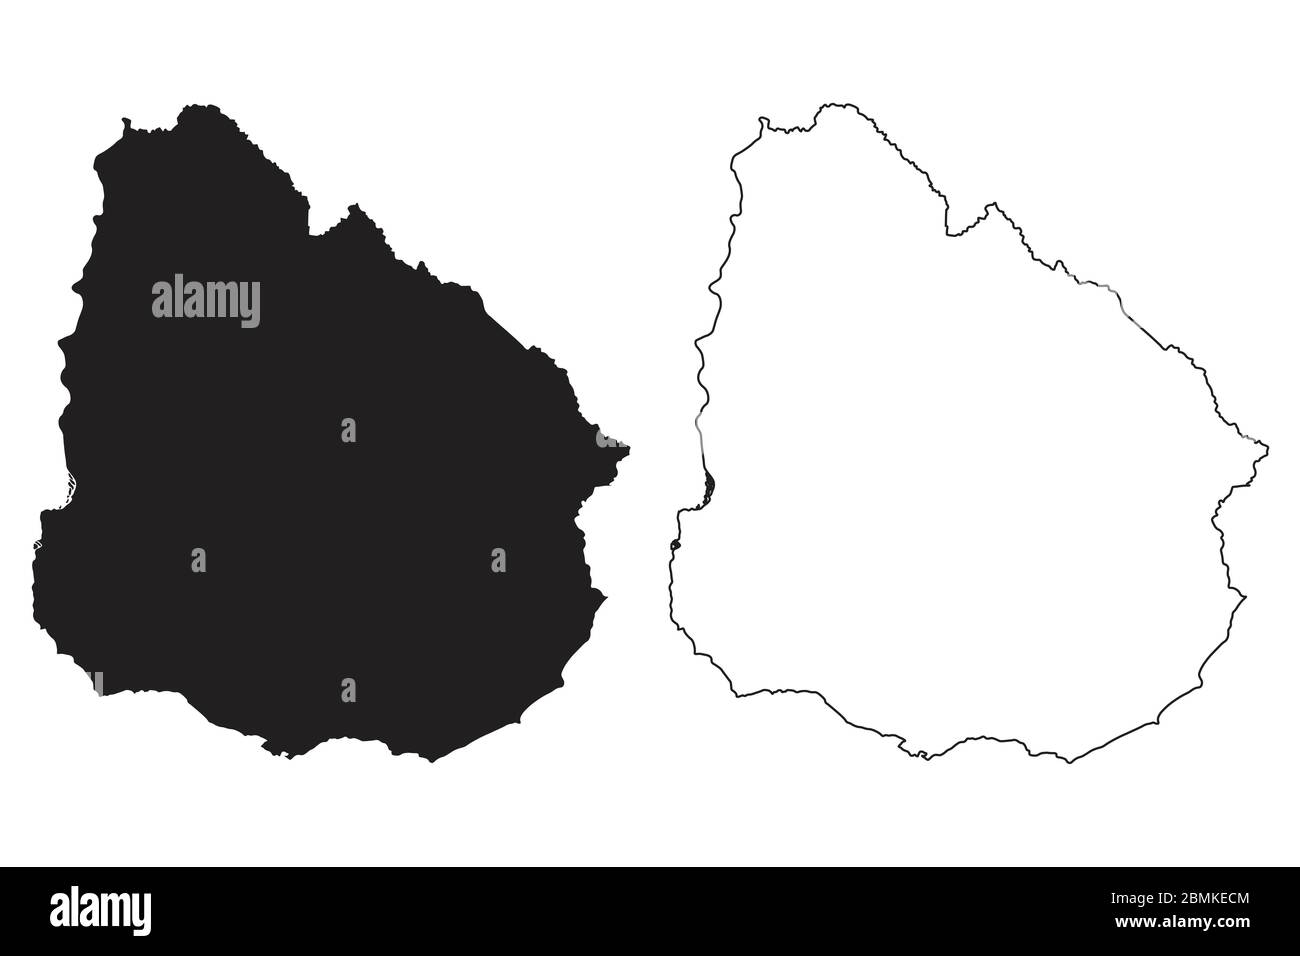 Uruguay Country Map. Black silhouette and outline isolated on white background. EPS Vector Stock Vector